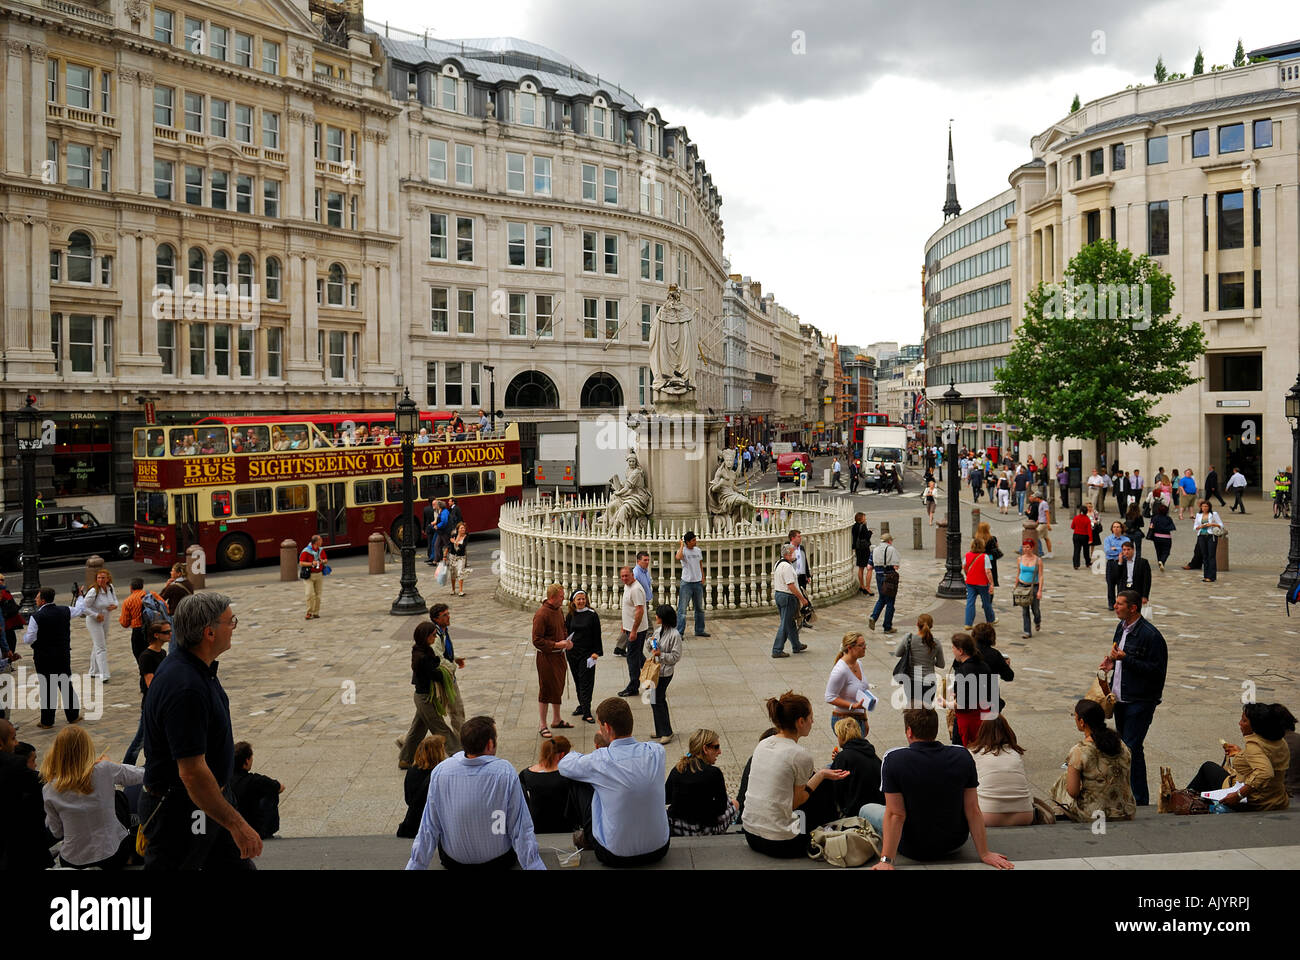 City scape of Ludgate Hill, in the city of London, England. Stock Photo